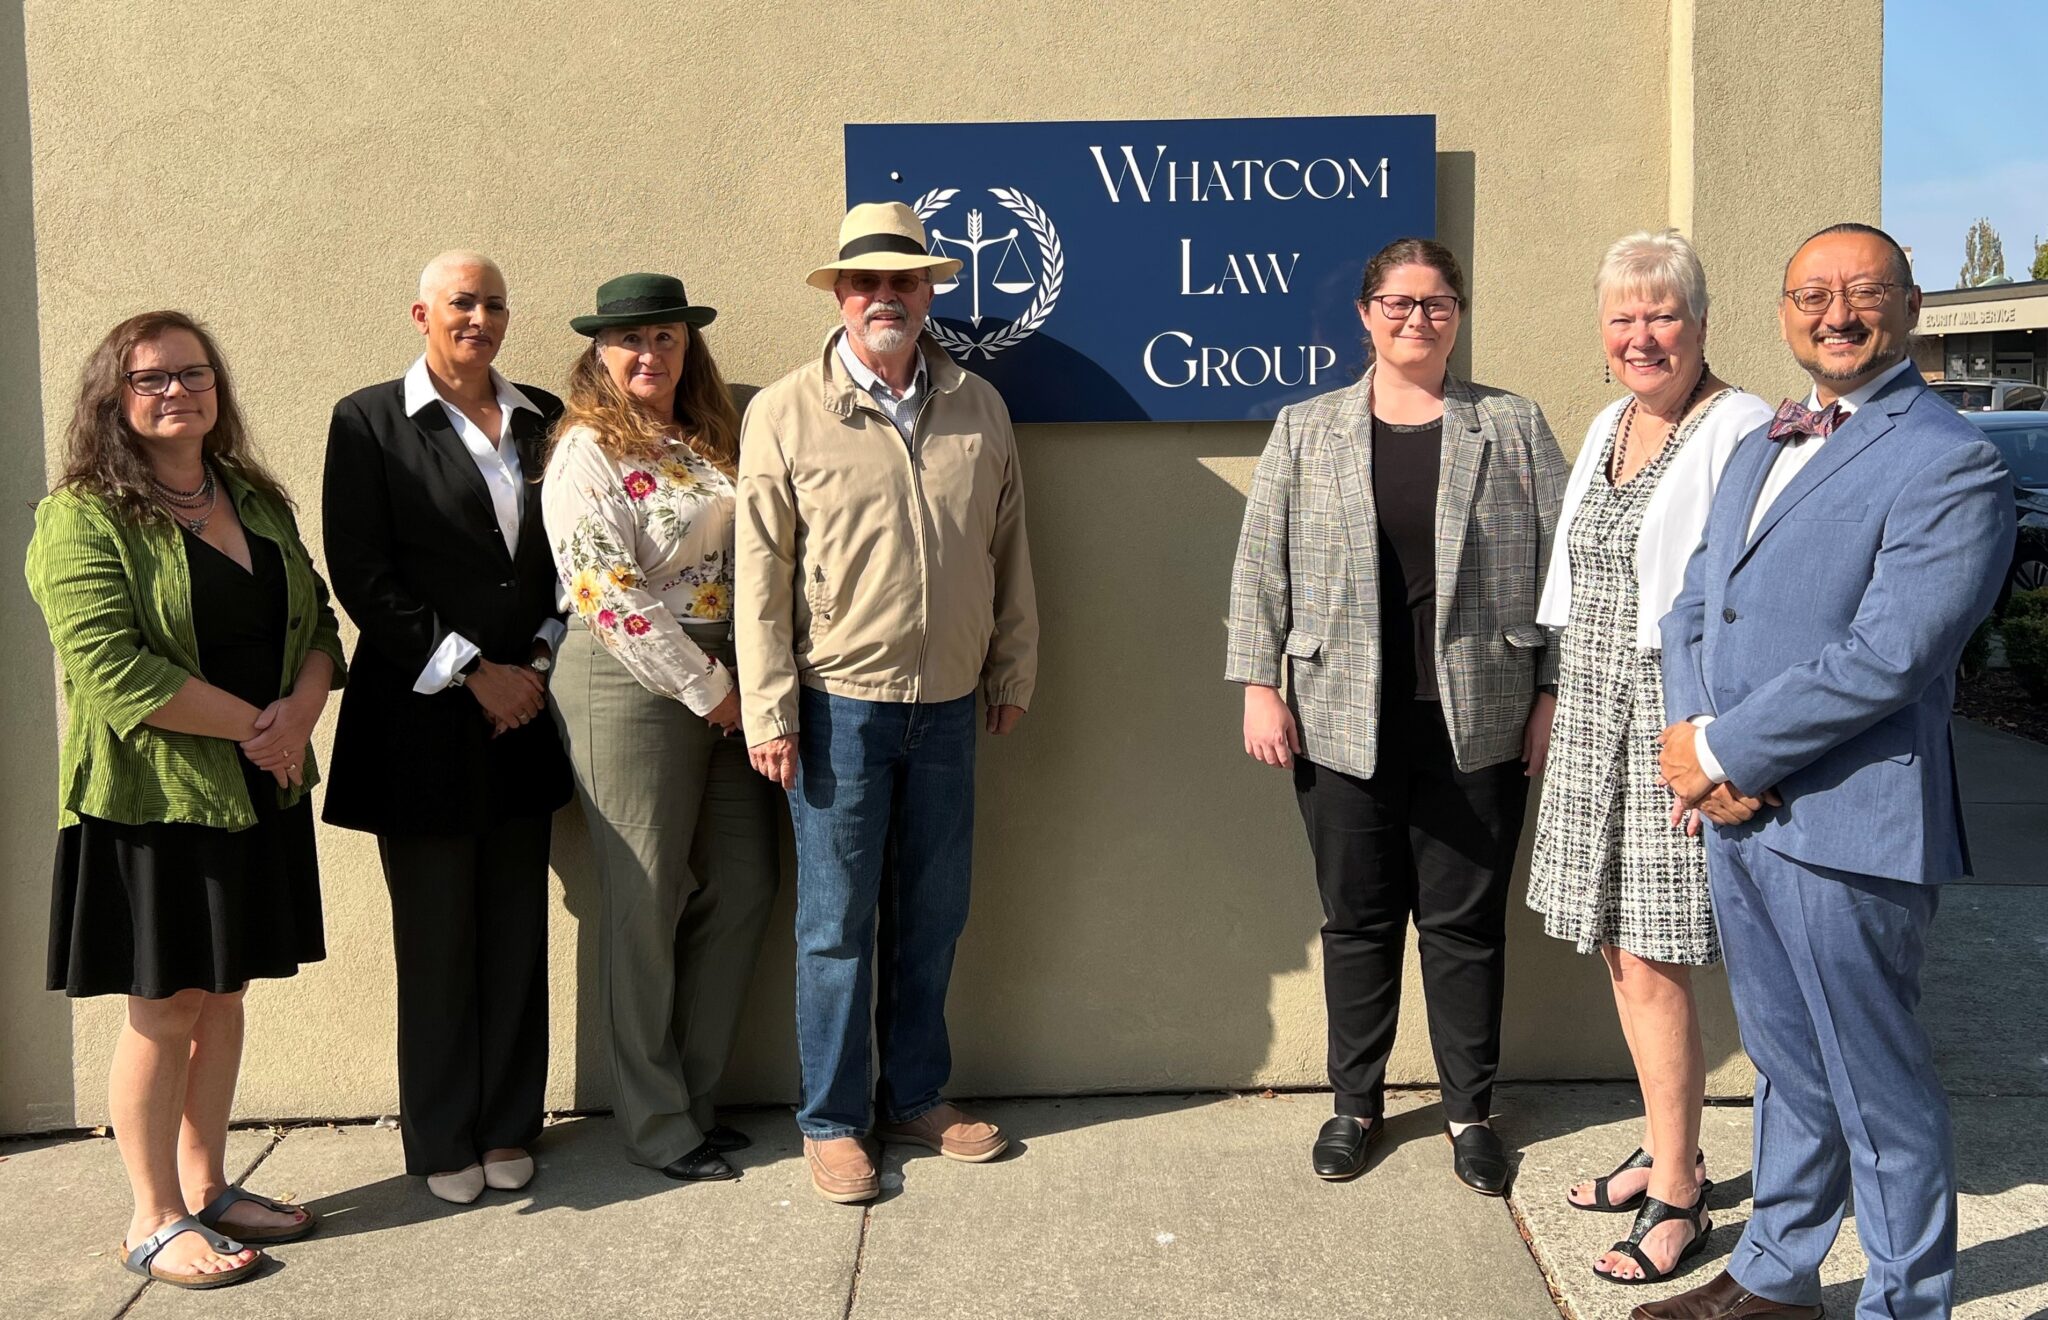 Our History and Mission Whatcom Law Group